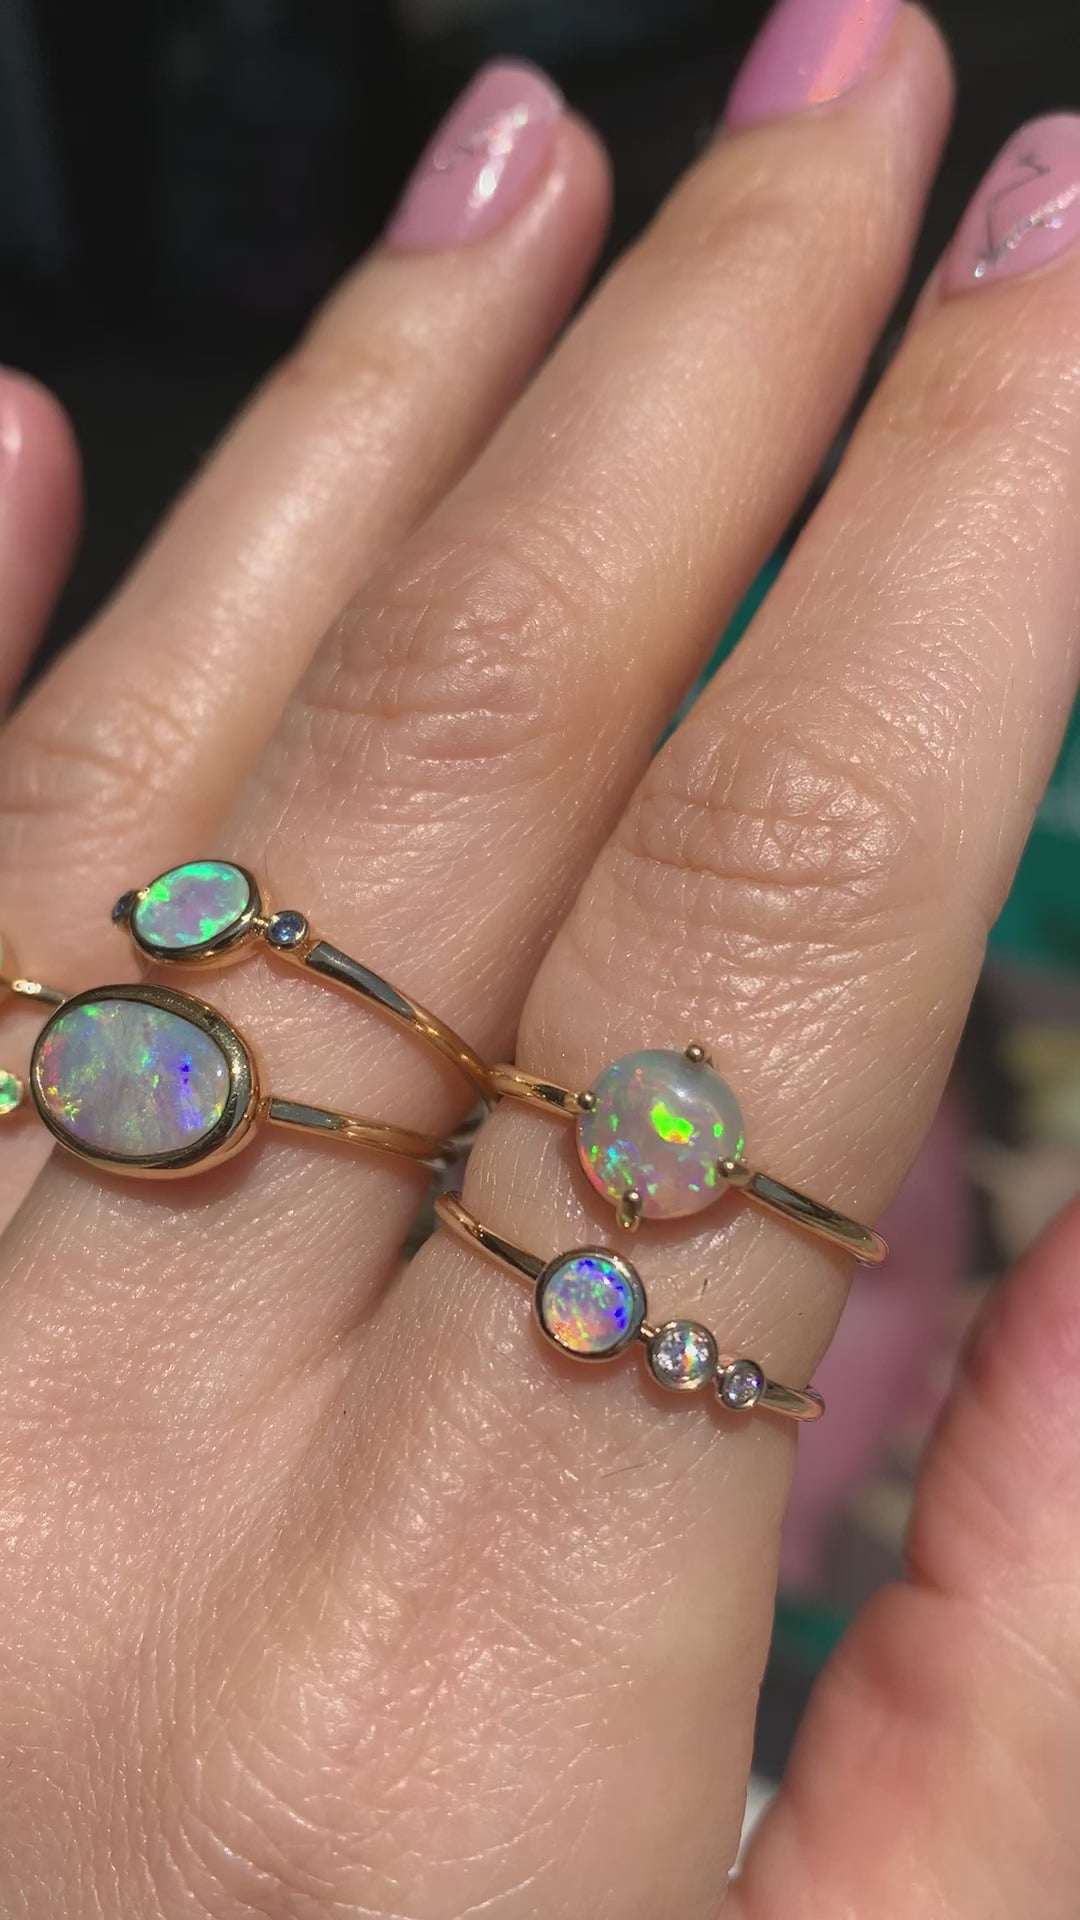 Large Round Opal Solitaire Ring